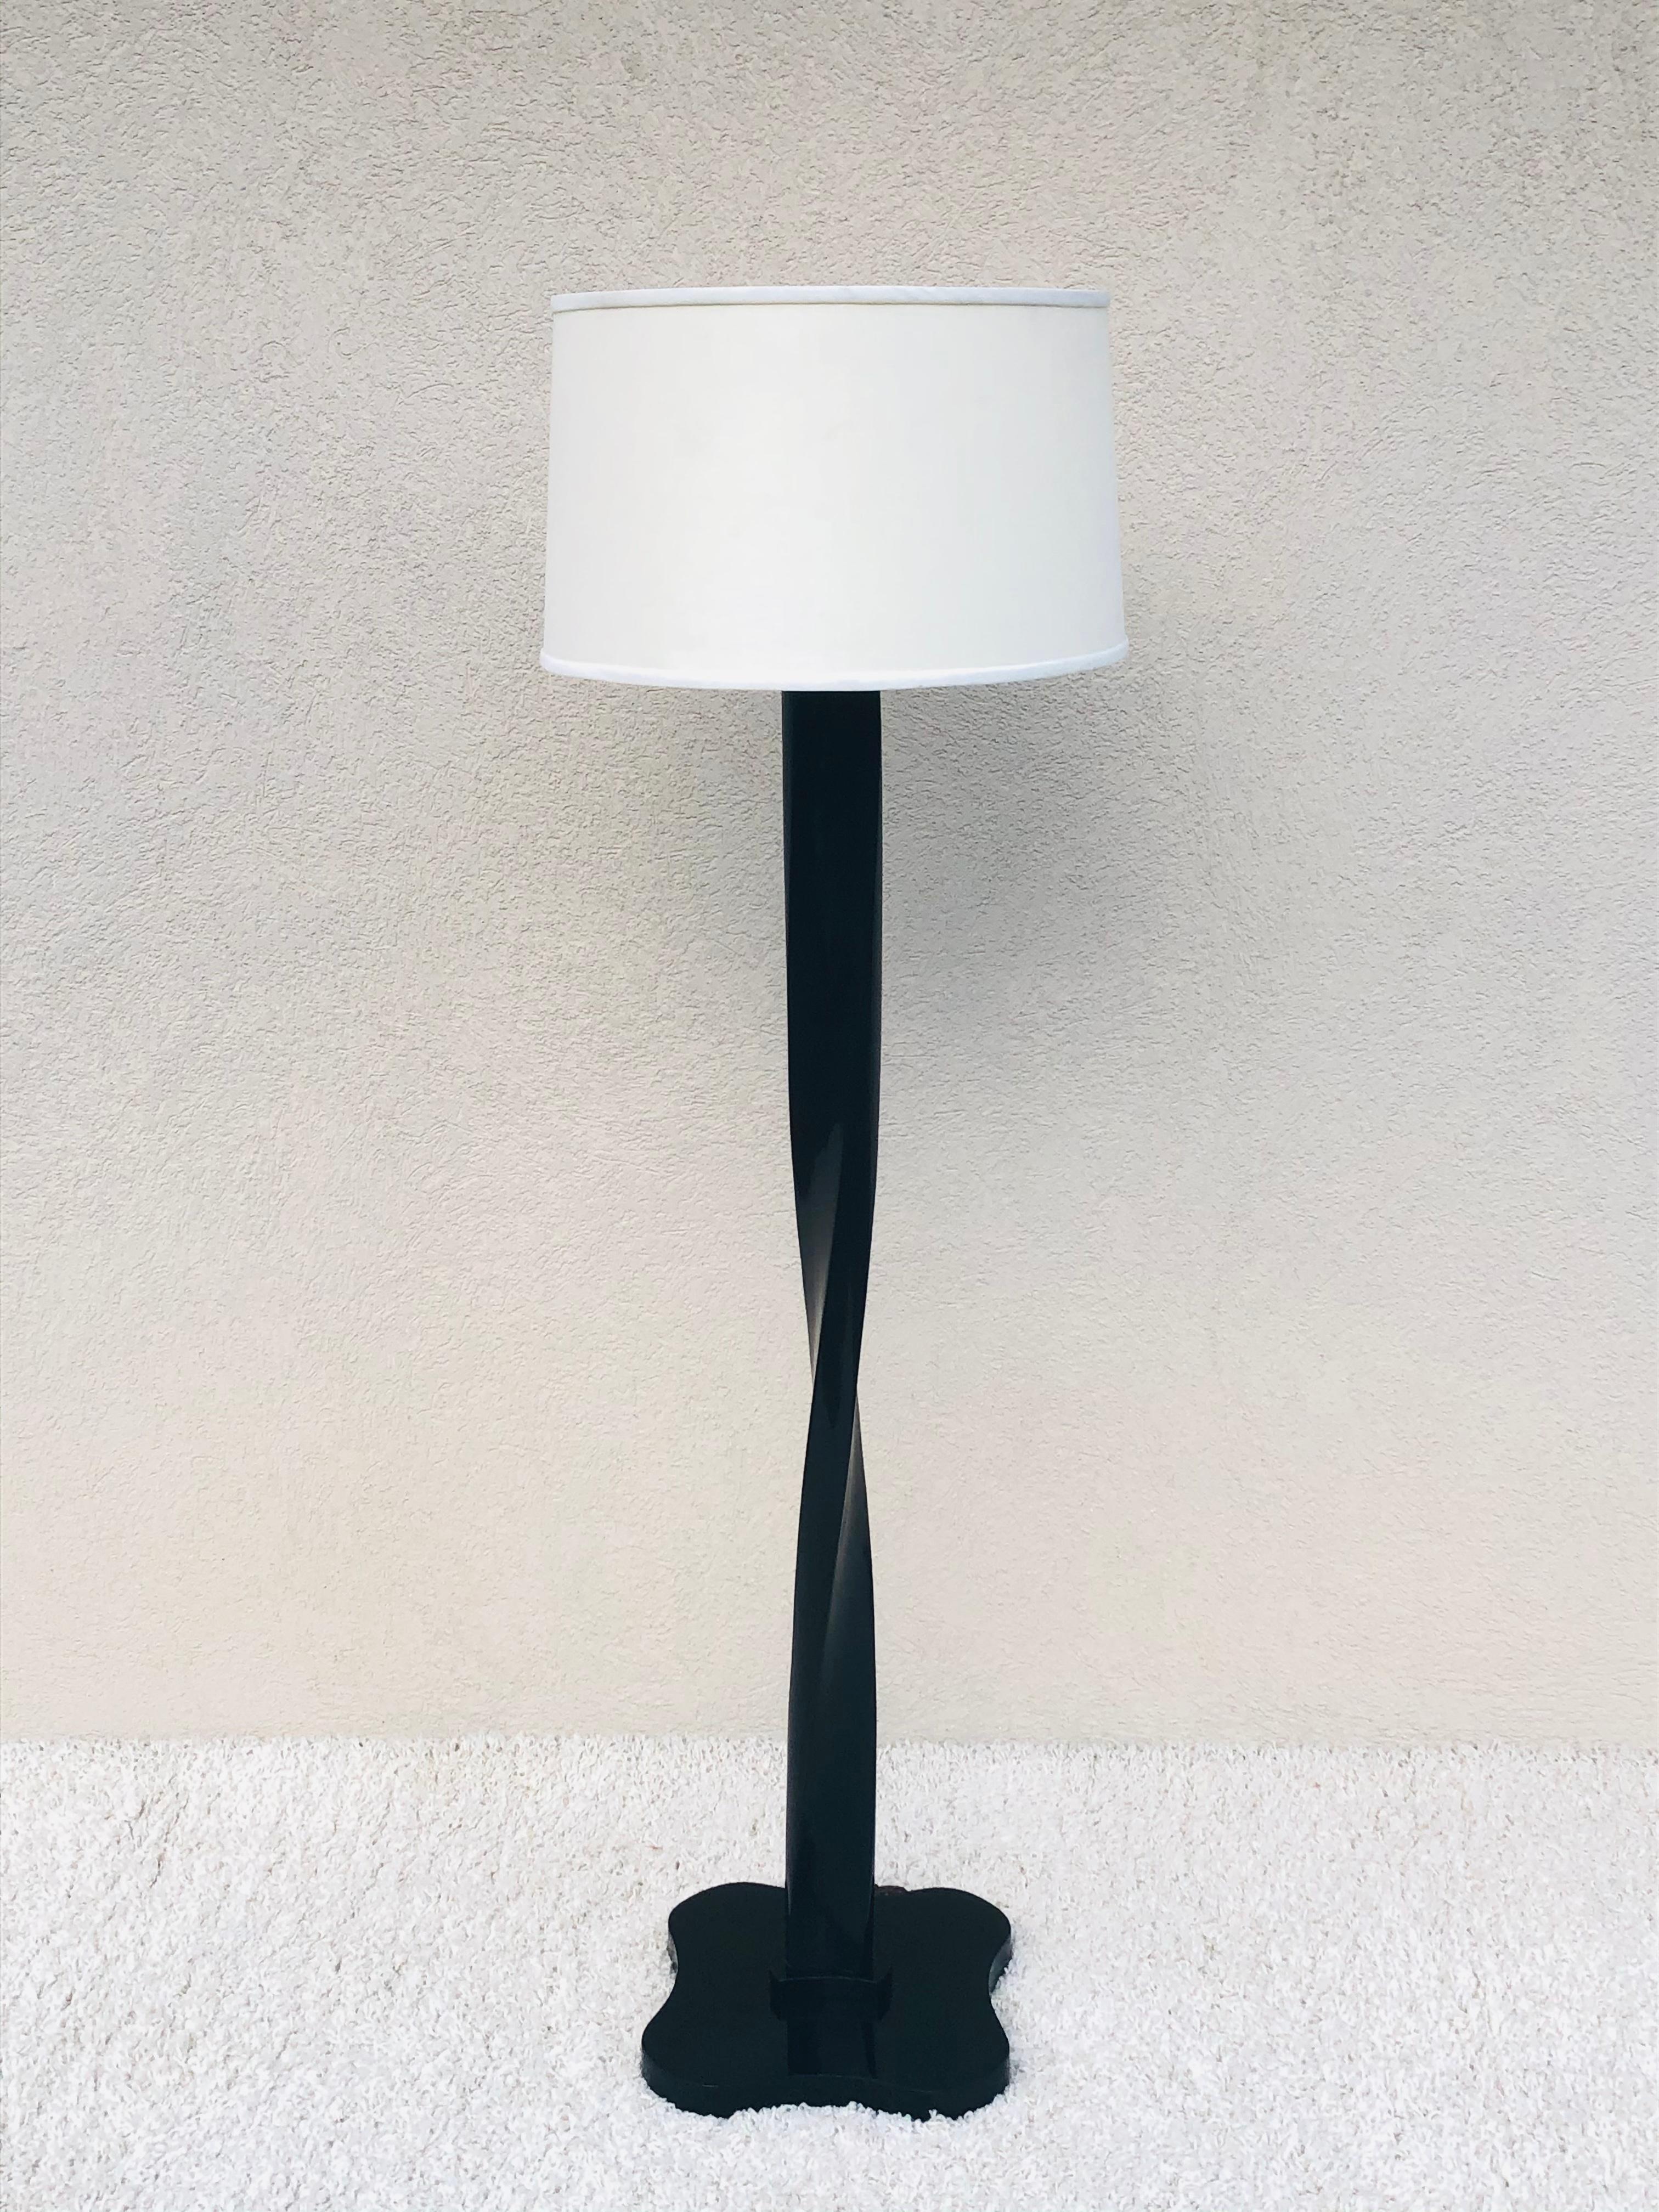 James Mont standing lamp, dark walnut lacquered finish, midcentury Hollywood Regency design.
Mont was born Demetrios Pecintoglu in Istanbul (then Constantinople, capital of the Ottoman Empire) in 1904. The early life of the man who became Mont is